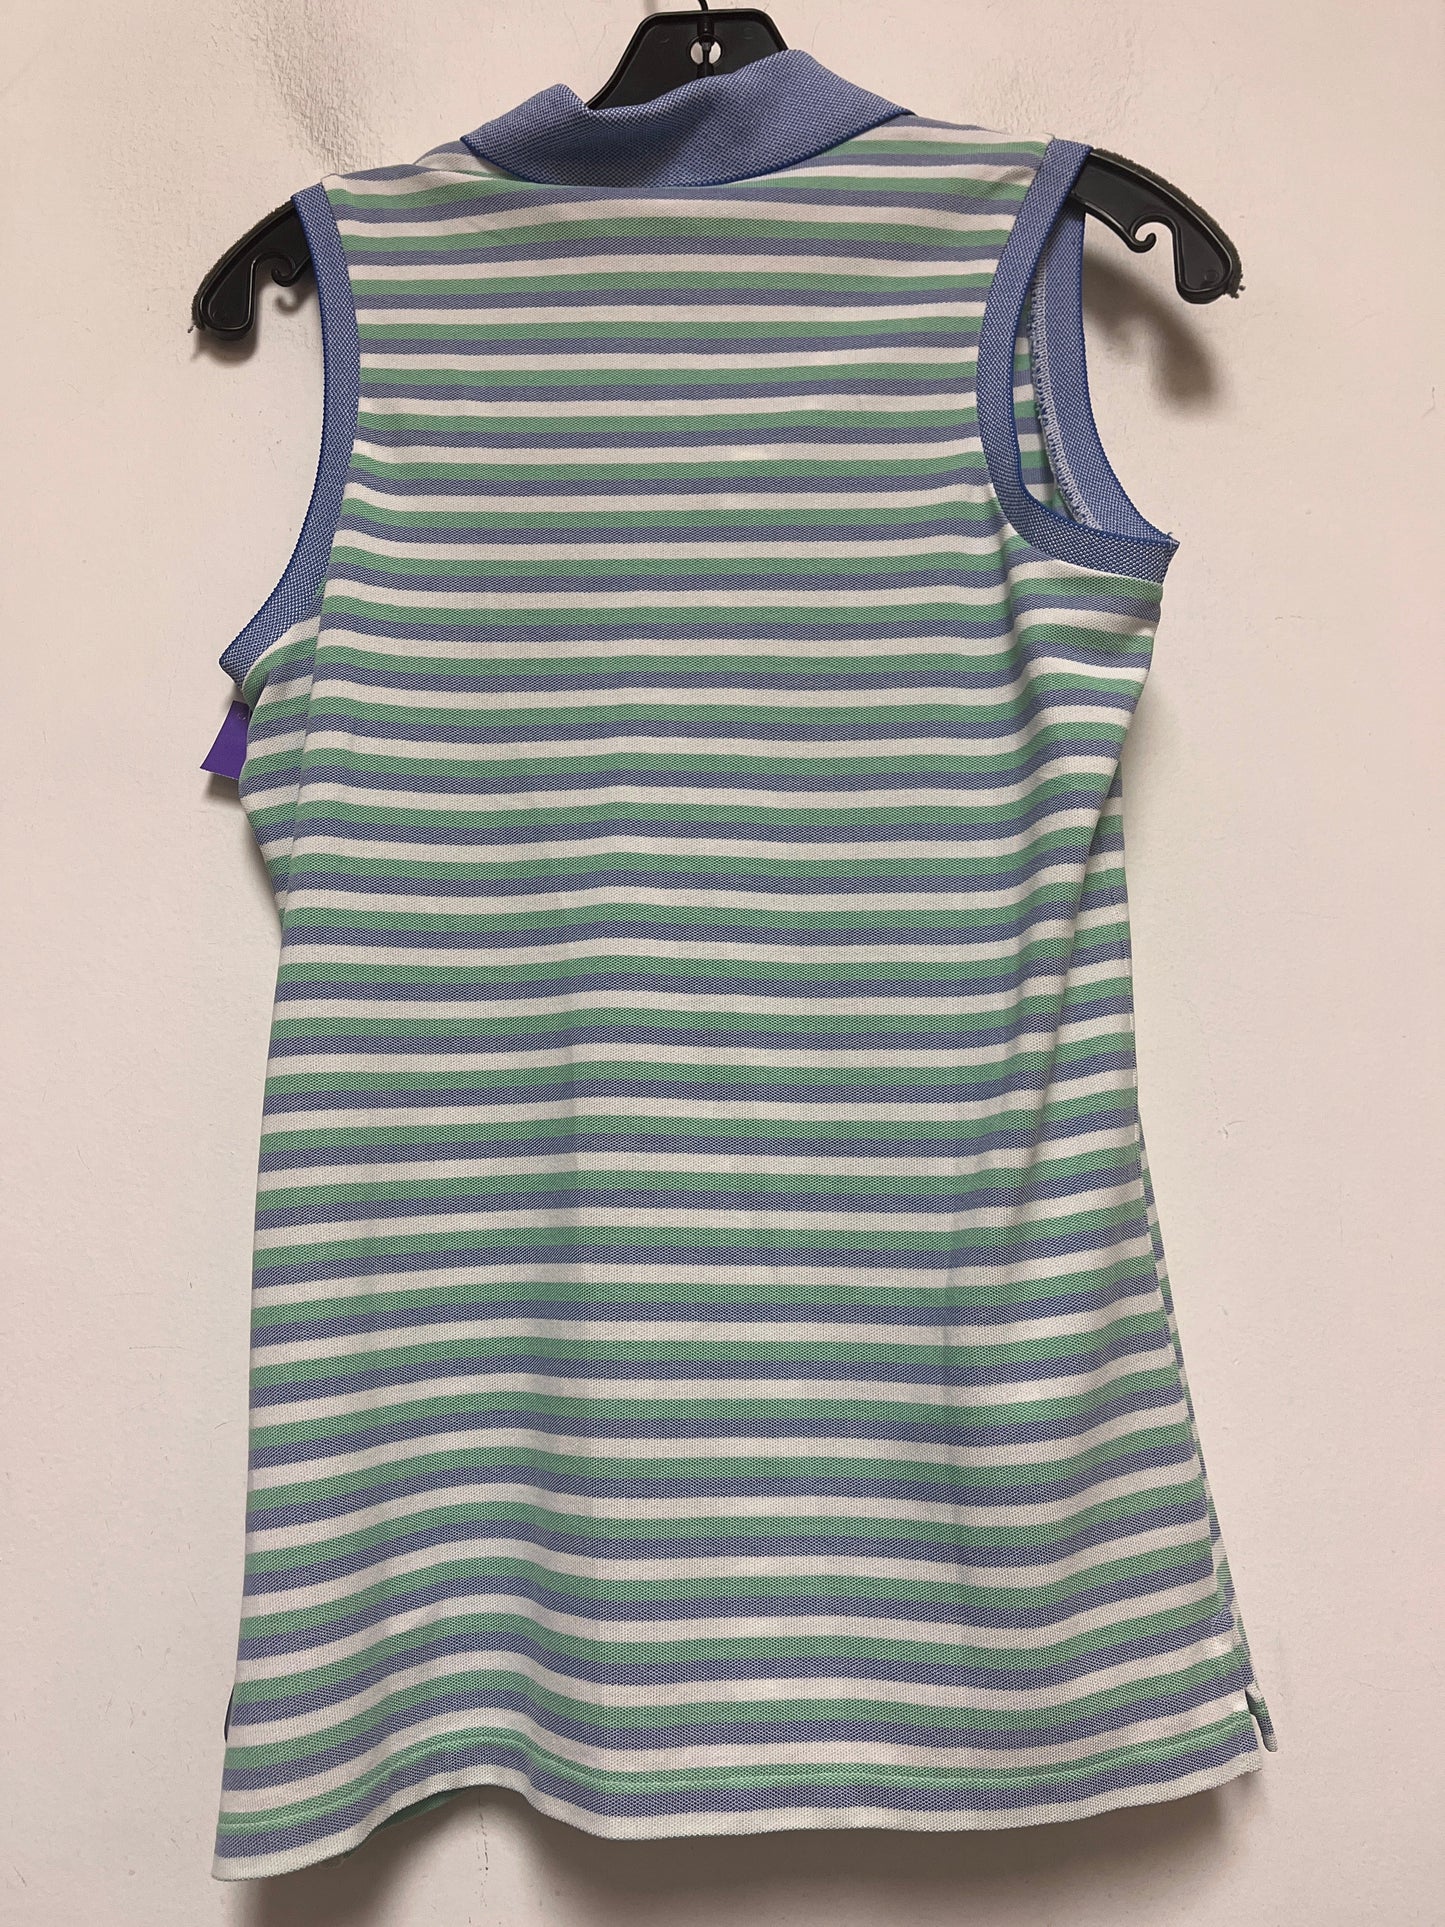 Striped Pattern Athletic Tank Top Polo Ralph Lauren, Size S